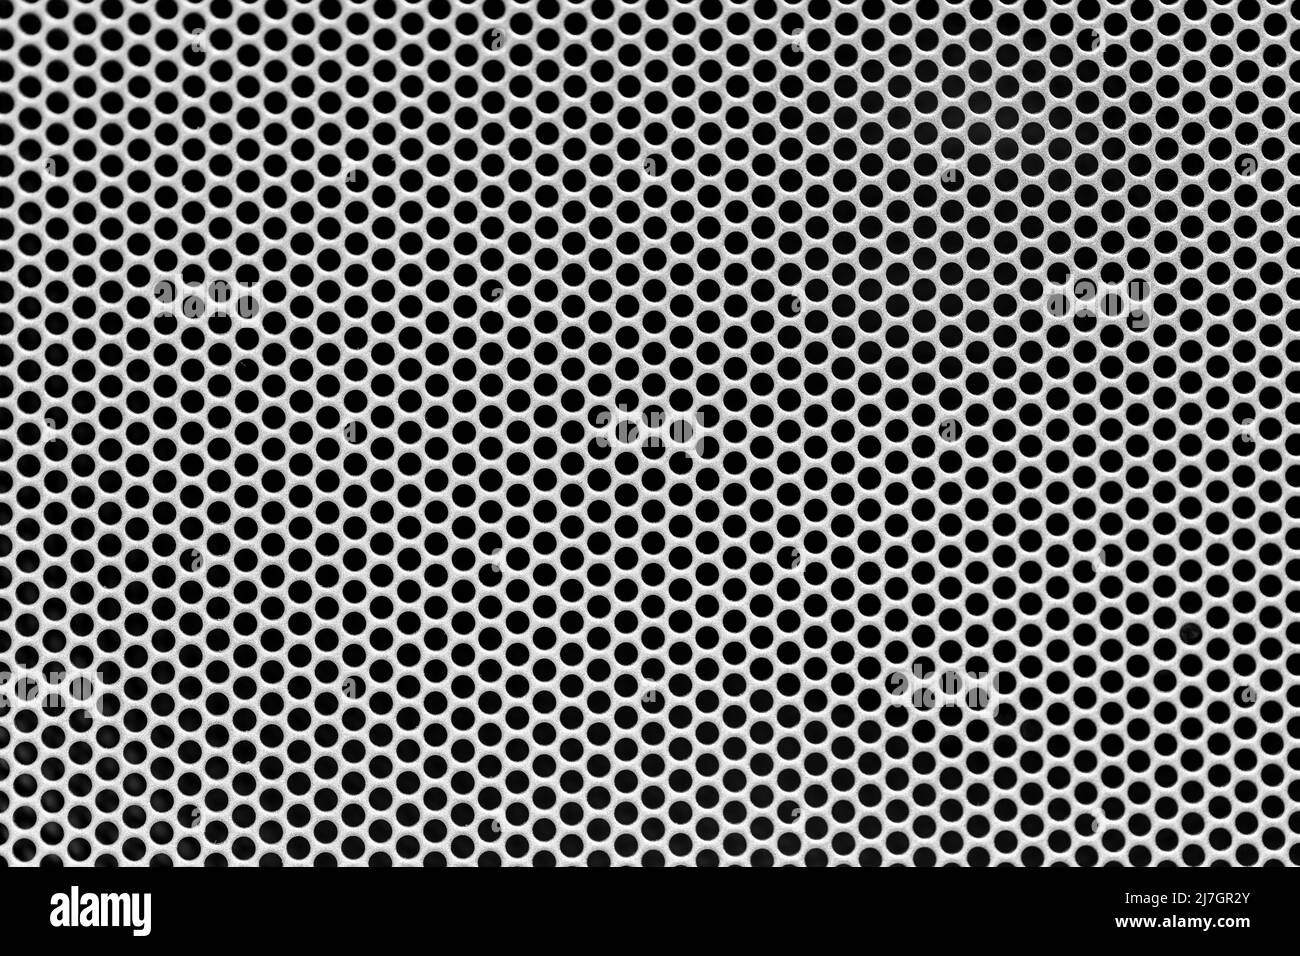 https://c8.alamy.com/comp/2J7GR2Y/steel-grill-mesh-full-screen-background-a-close-up-of-a-music-pa-speaker-showing-the-hexagon-mesh-steel-pattern-2J7GR2Y.jpg